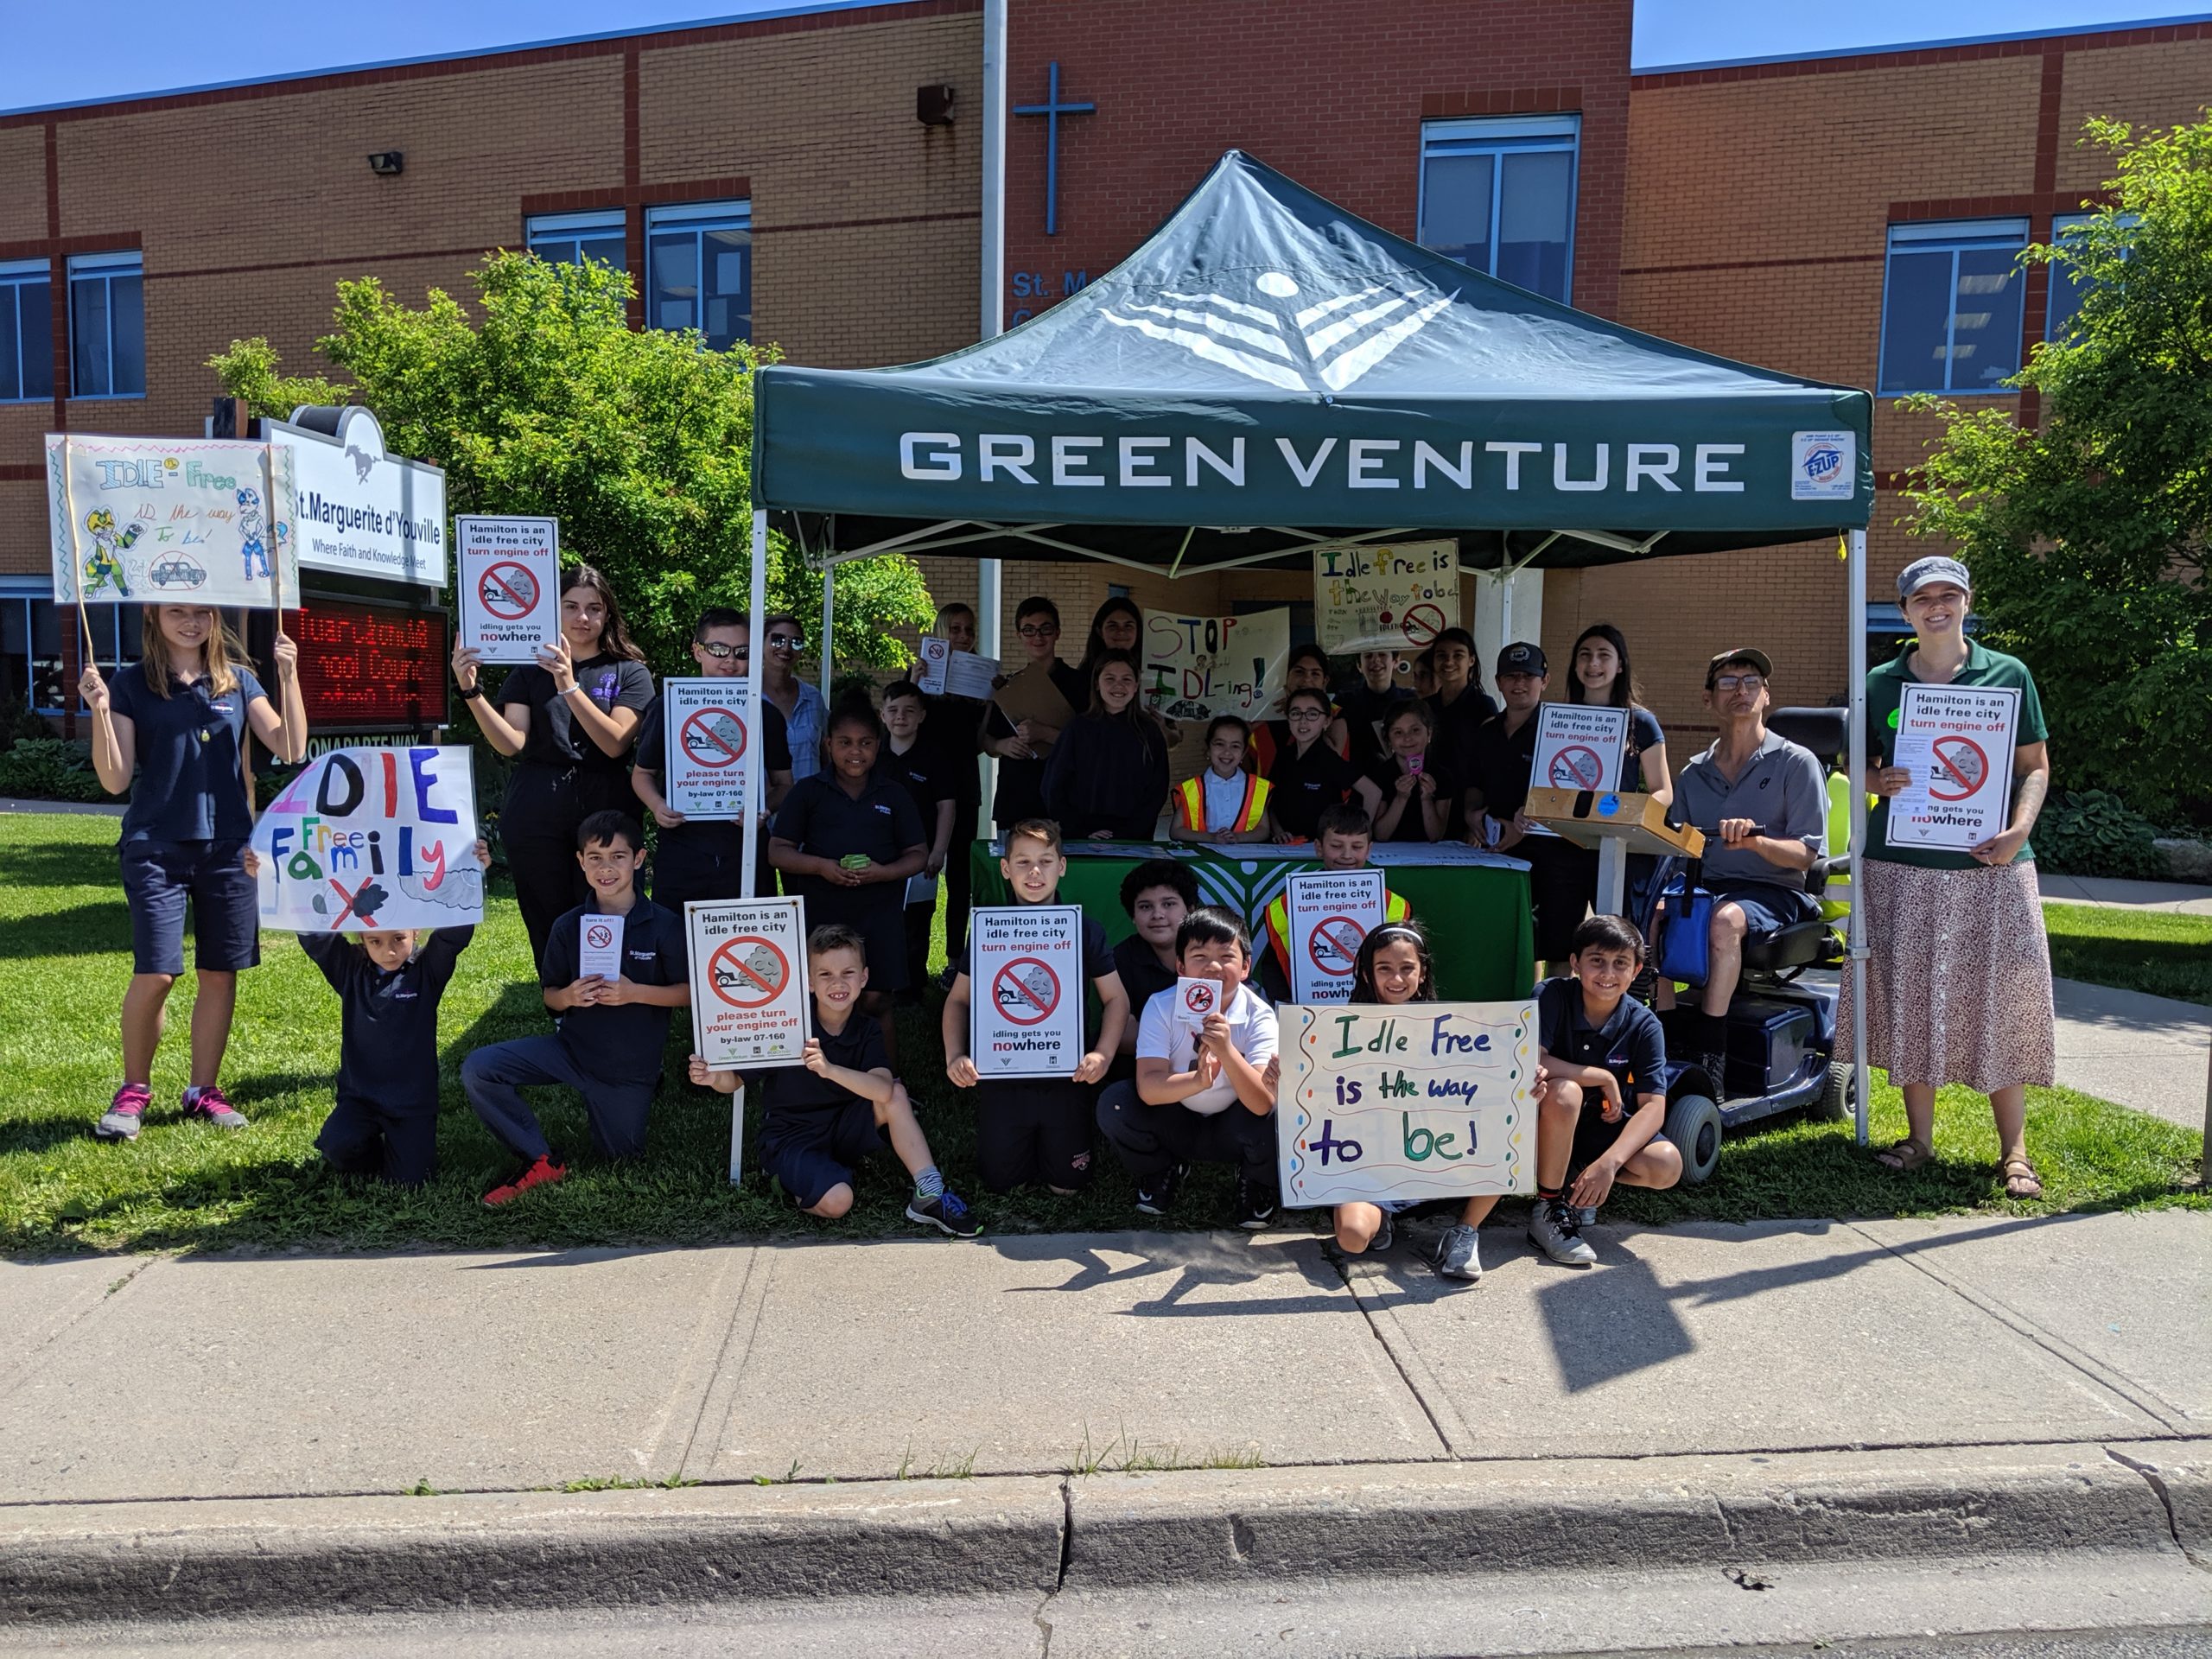 A classroom of children stand and sit in front of a school, holding up no idling signs and posters beneath a Green Venture tent.